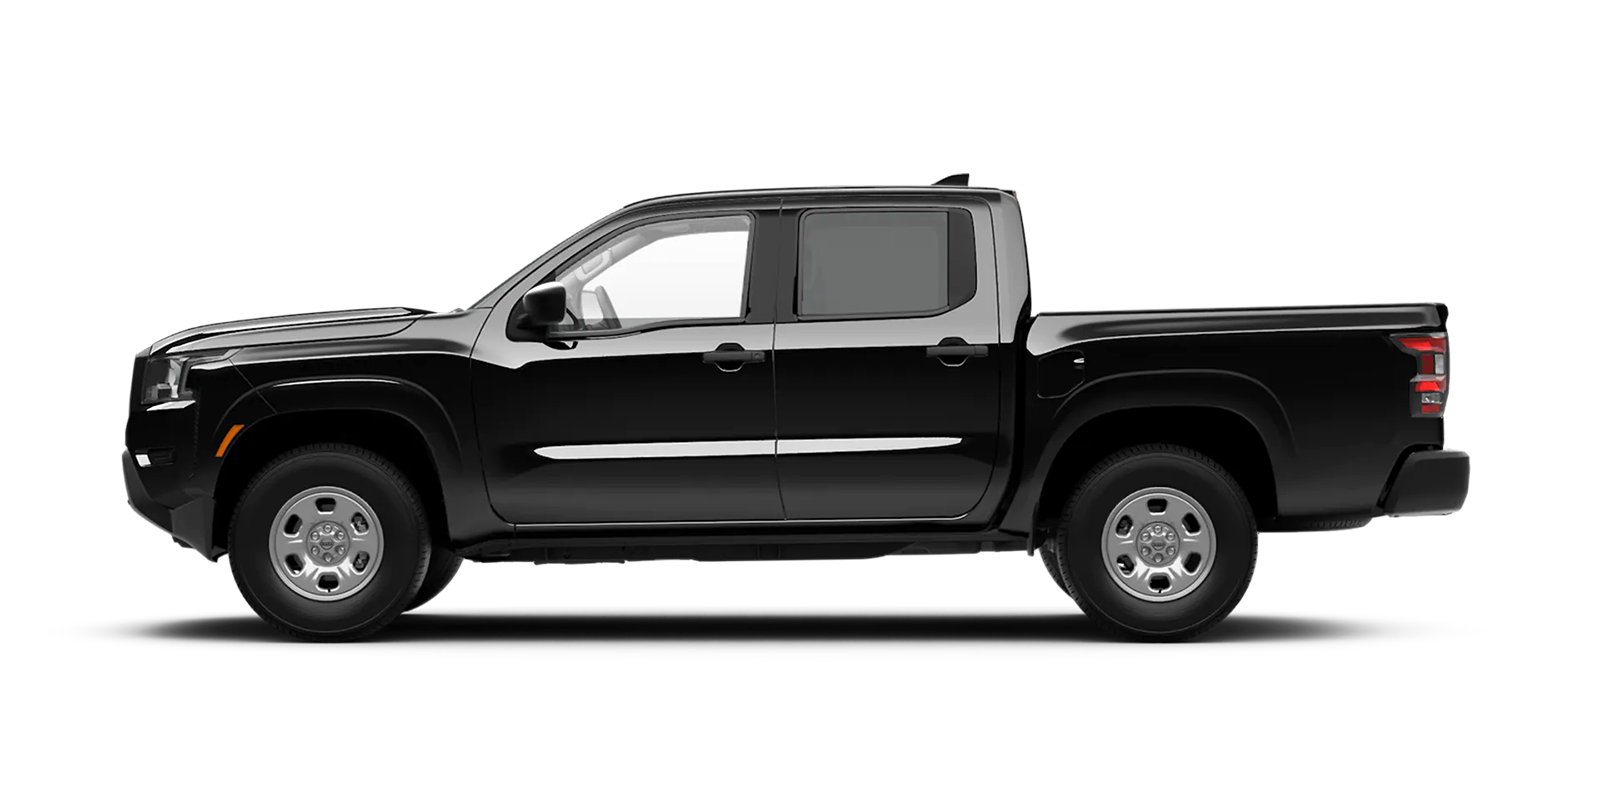 2022 Frontier Crew Cab S 4x2 in Super Black | Rusty Wallace Nissan in Knoxville TN